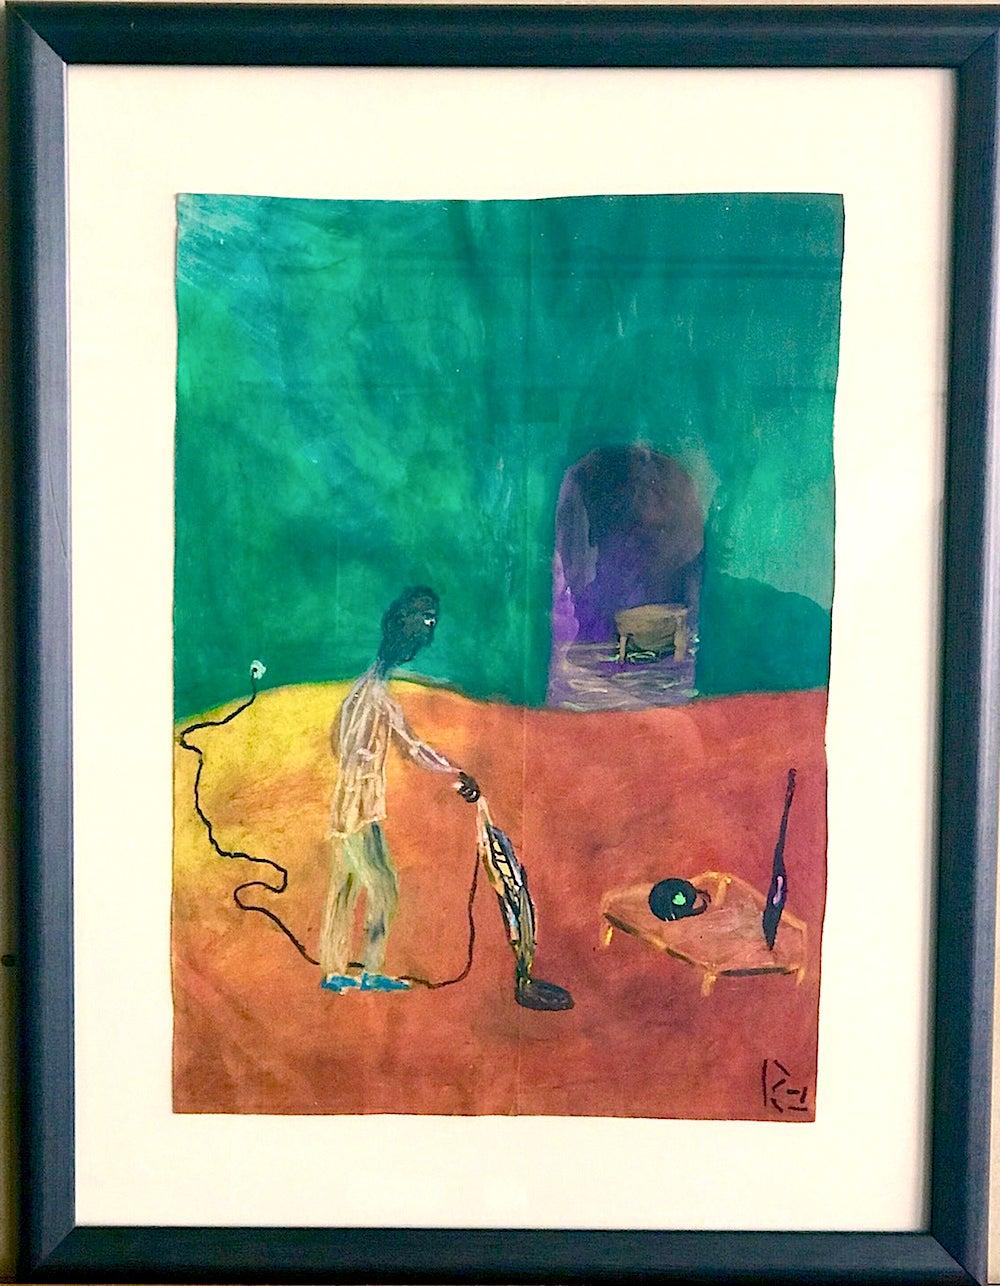 Reginald K. Gee Figurative Art - HIS NEW DEN Signed Oil Pastel on Paper, Man with his Vacuum Cleaner, Self Taught